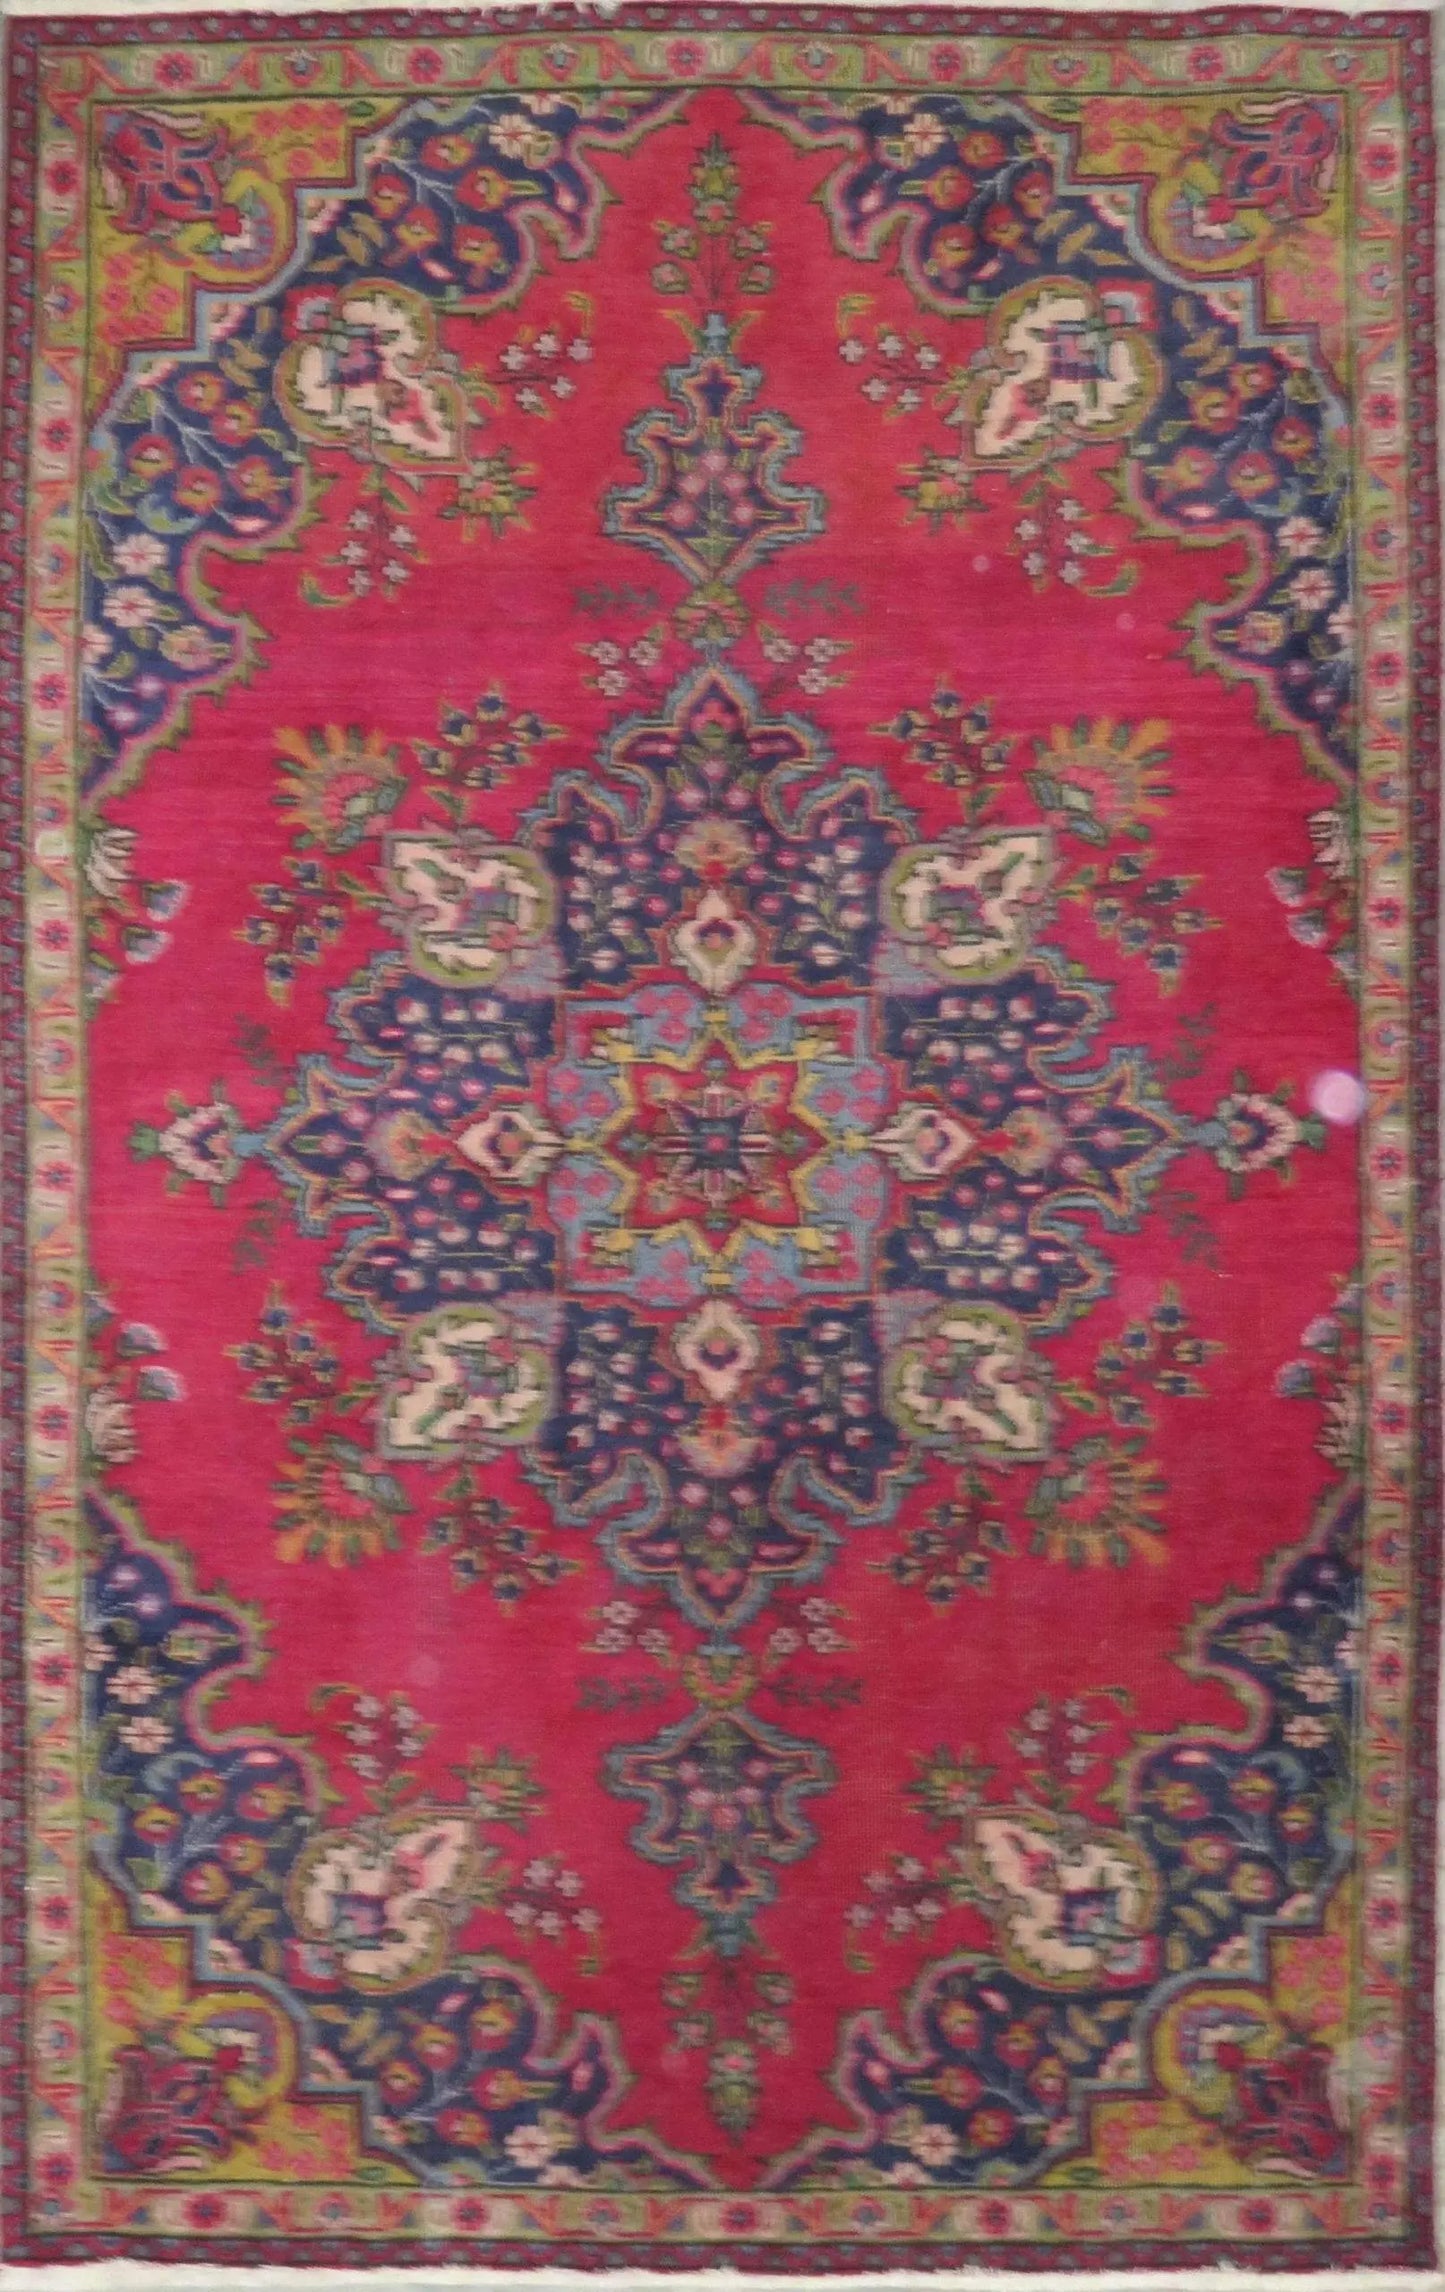 Hand-Knotted Persian Wool Rug _ Luxurious Vintage Design, 7'5" x 4'8", Artisan Crafted